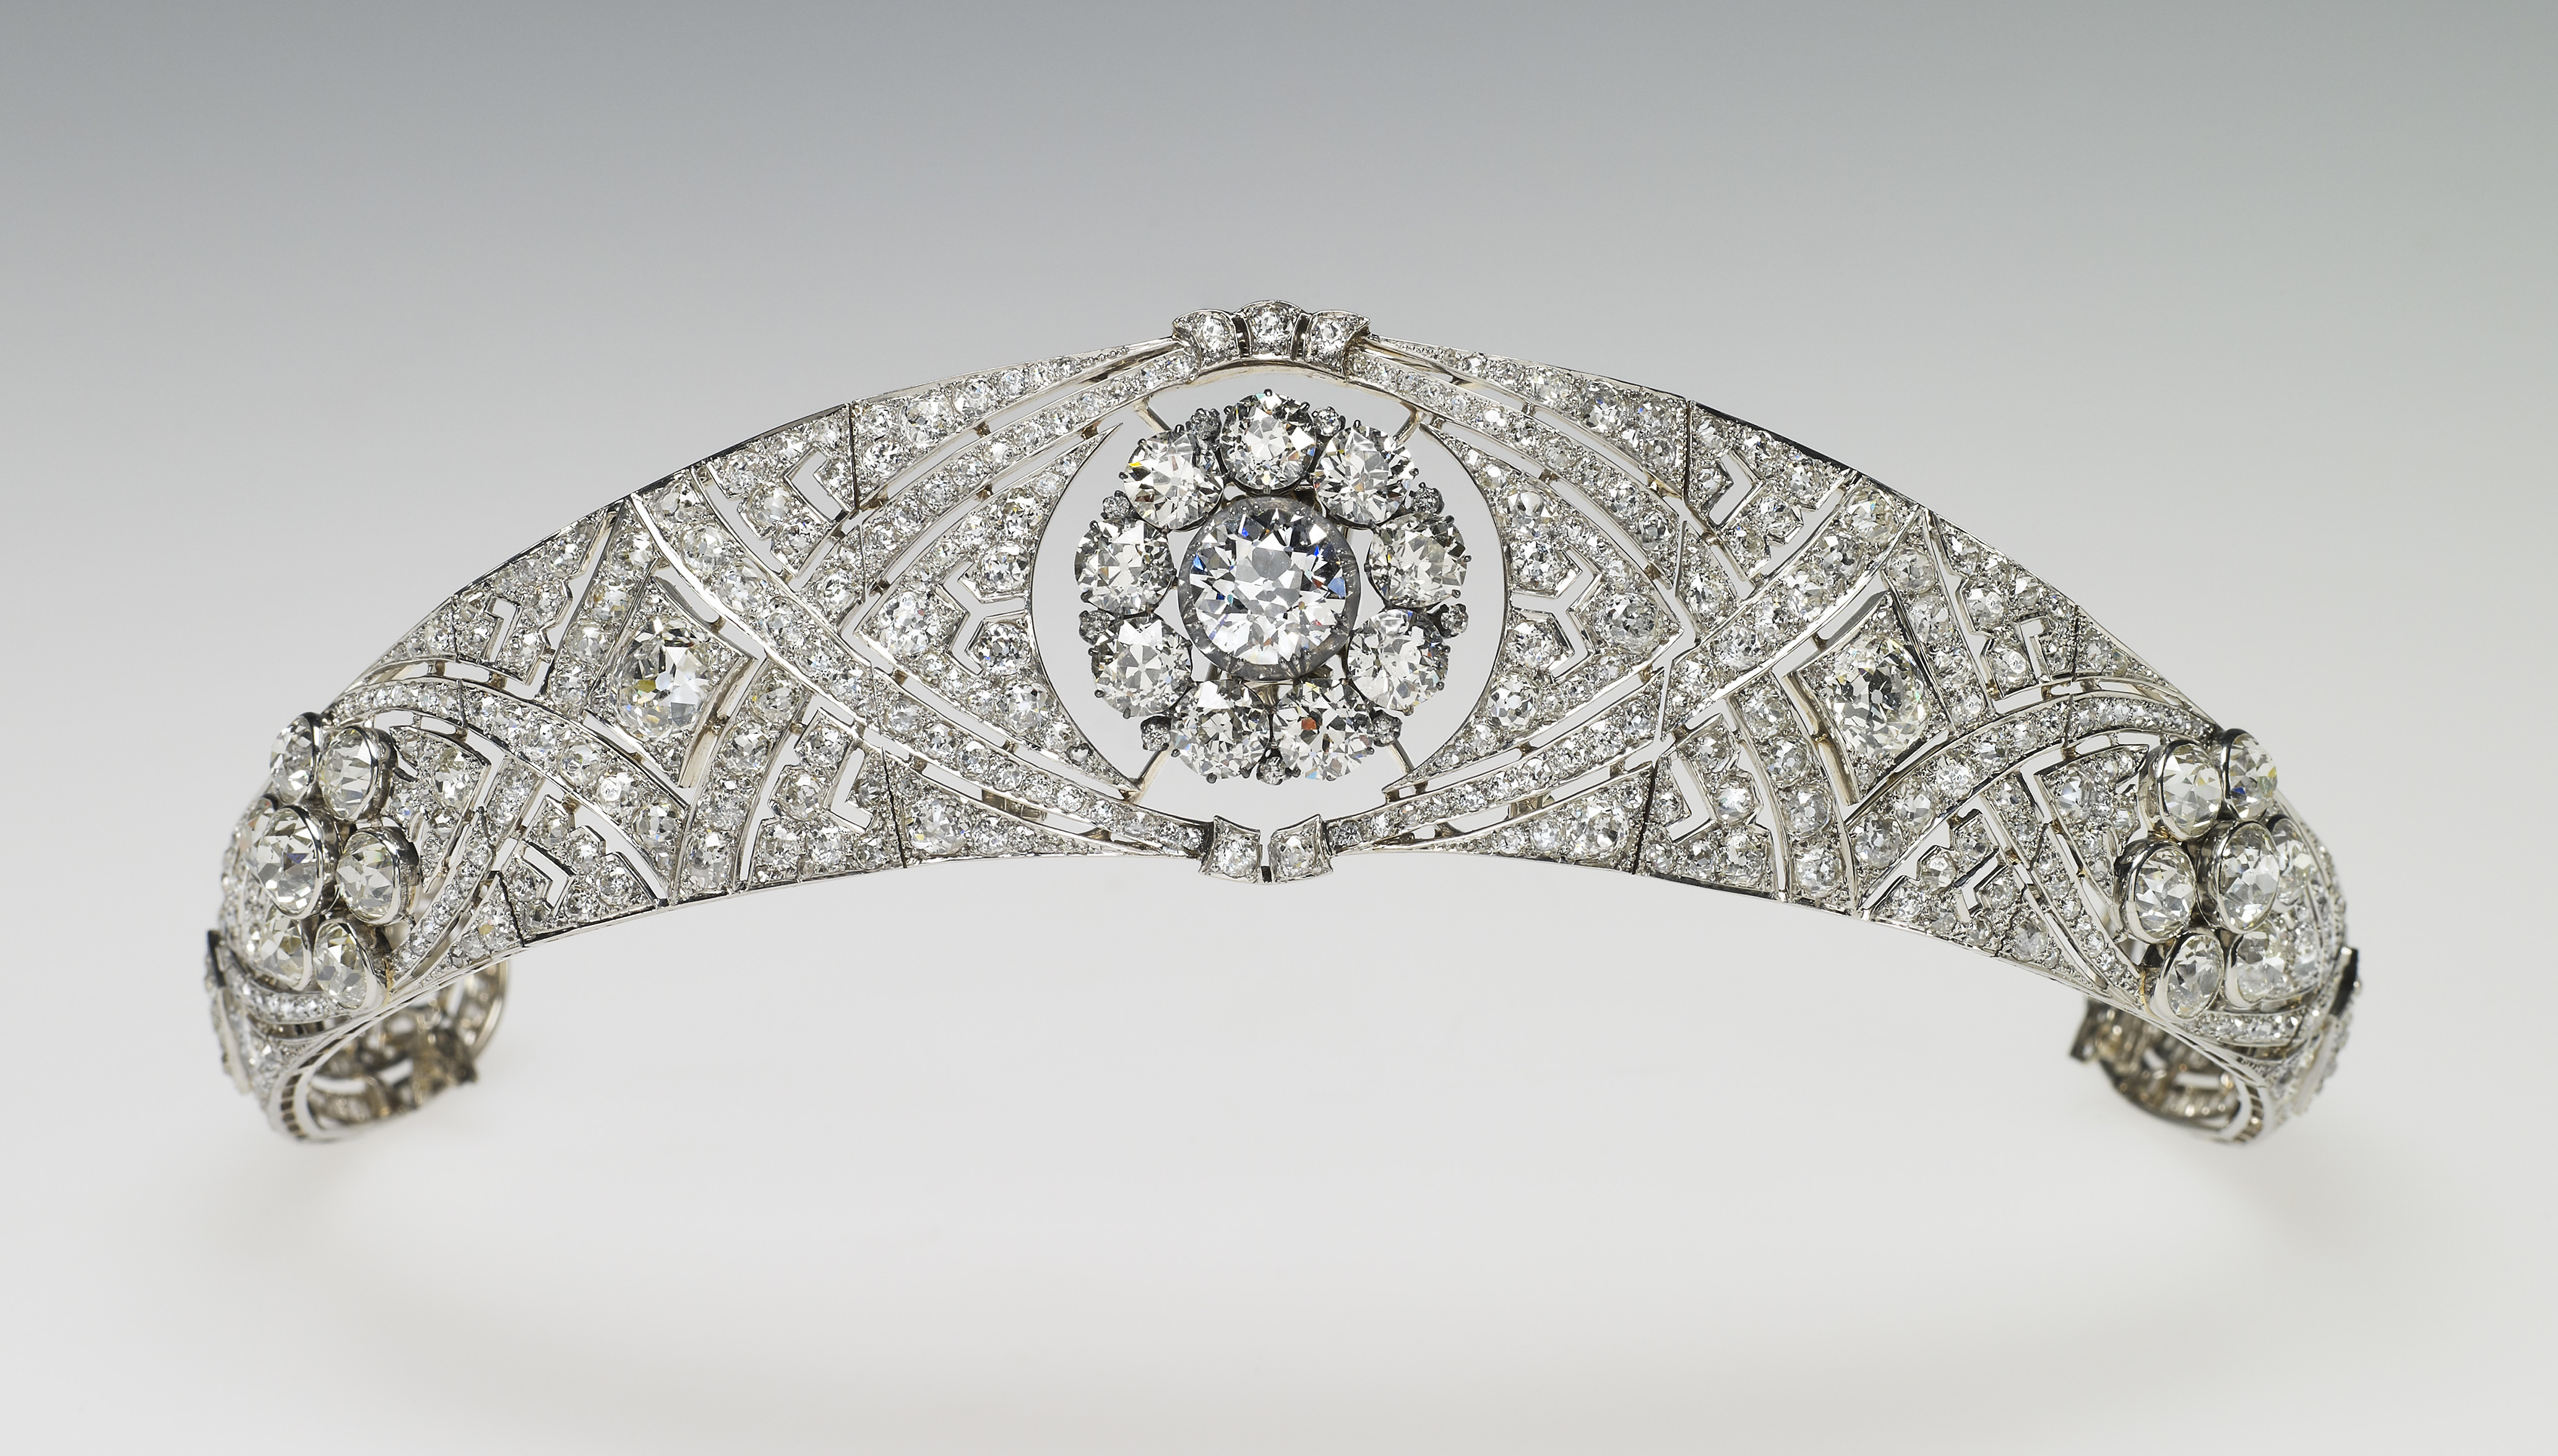 In this undated handout image released by the Royal Household, Queen Mary's Diamond Bandeau, which is being worn by Meghan Markle for her wedding to Prince Harry on May 19, 2018. (Handout/The Royal Household/Getty Images)